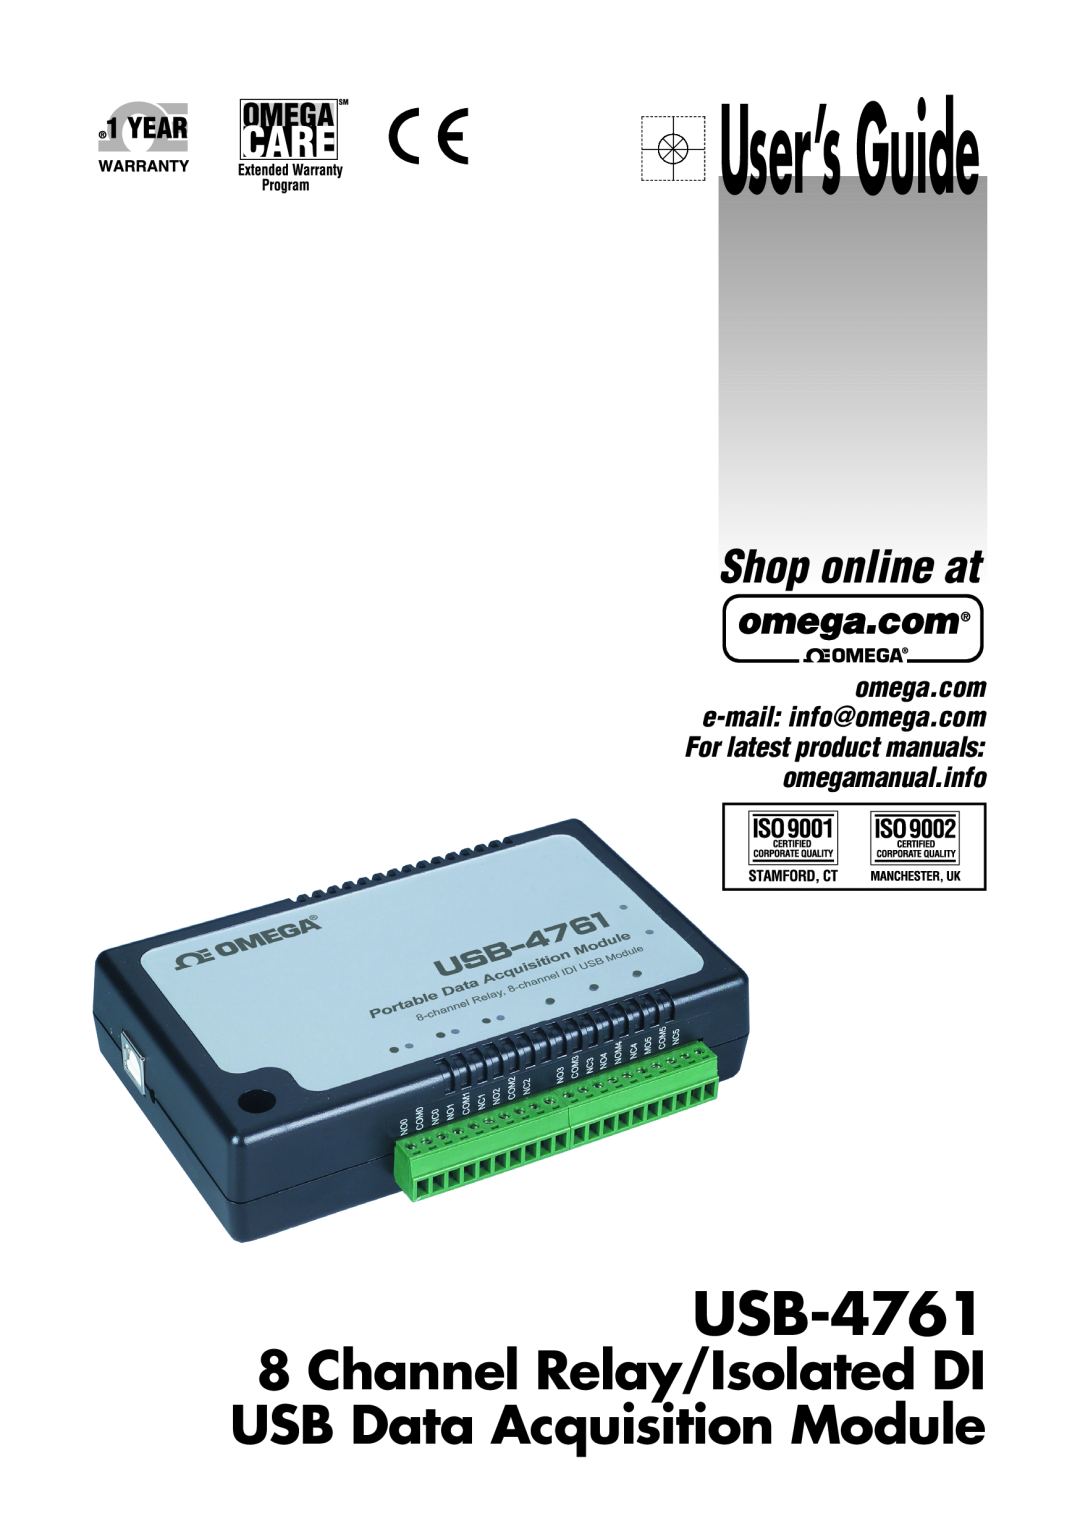 Omega Vehicle Security USB-4761 manual User’s Guide, Channel Relay/Isolated DI USB Data Acquisition Module, Shop online at 